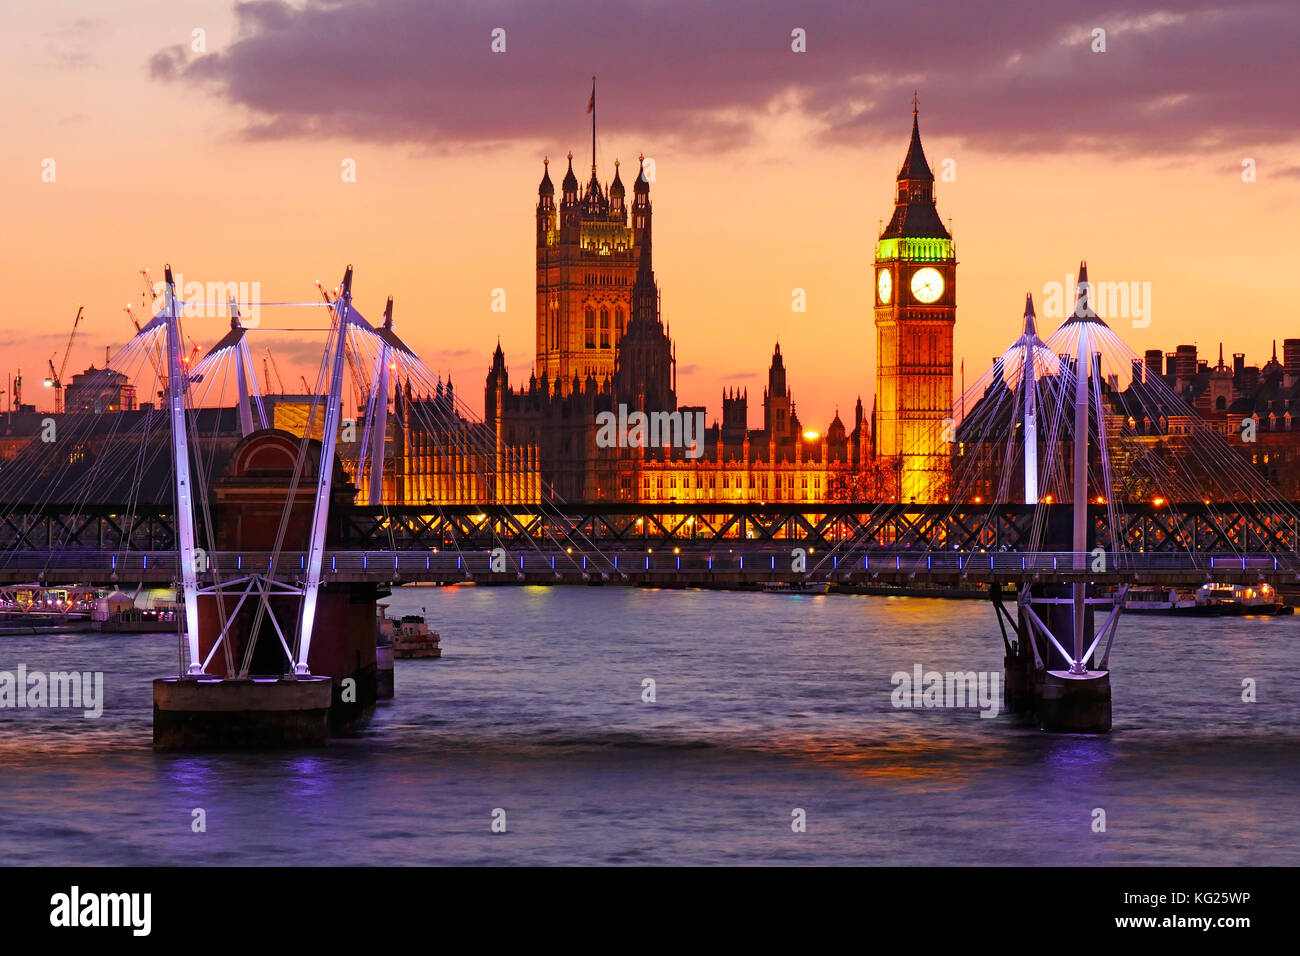 Skyline of London at dusk, with Big Ben and Houses of Parliament, London, England, United Kingdom, Europe Stock Photo